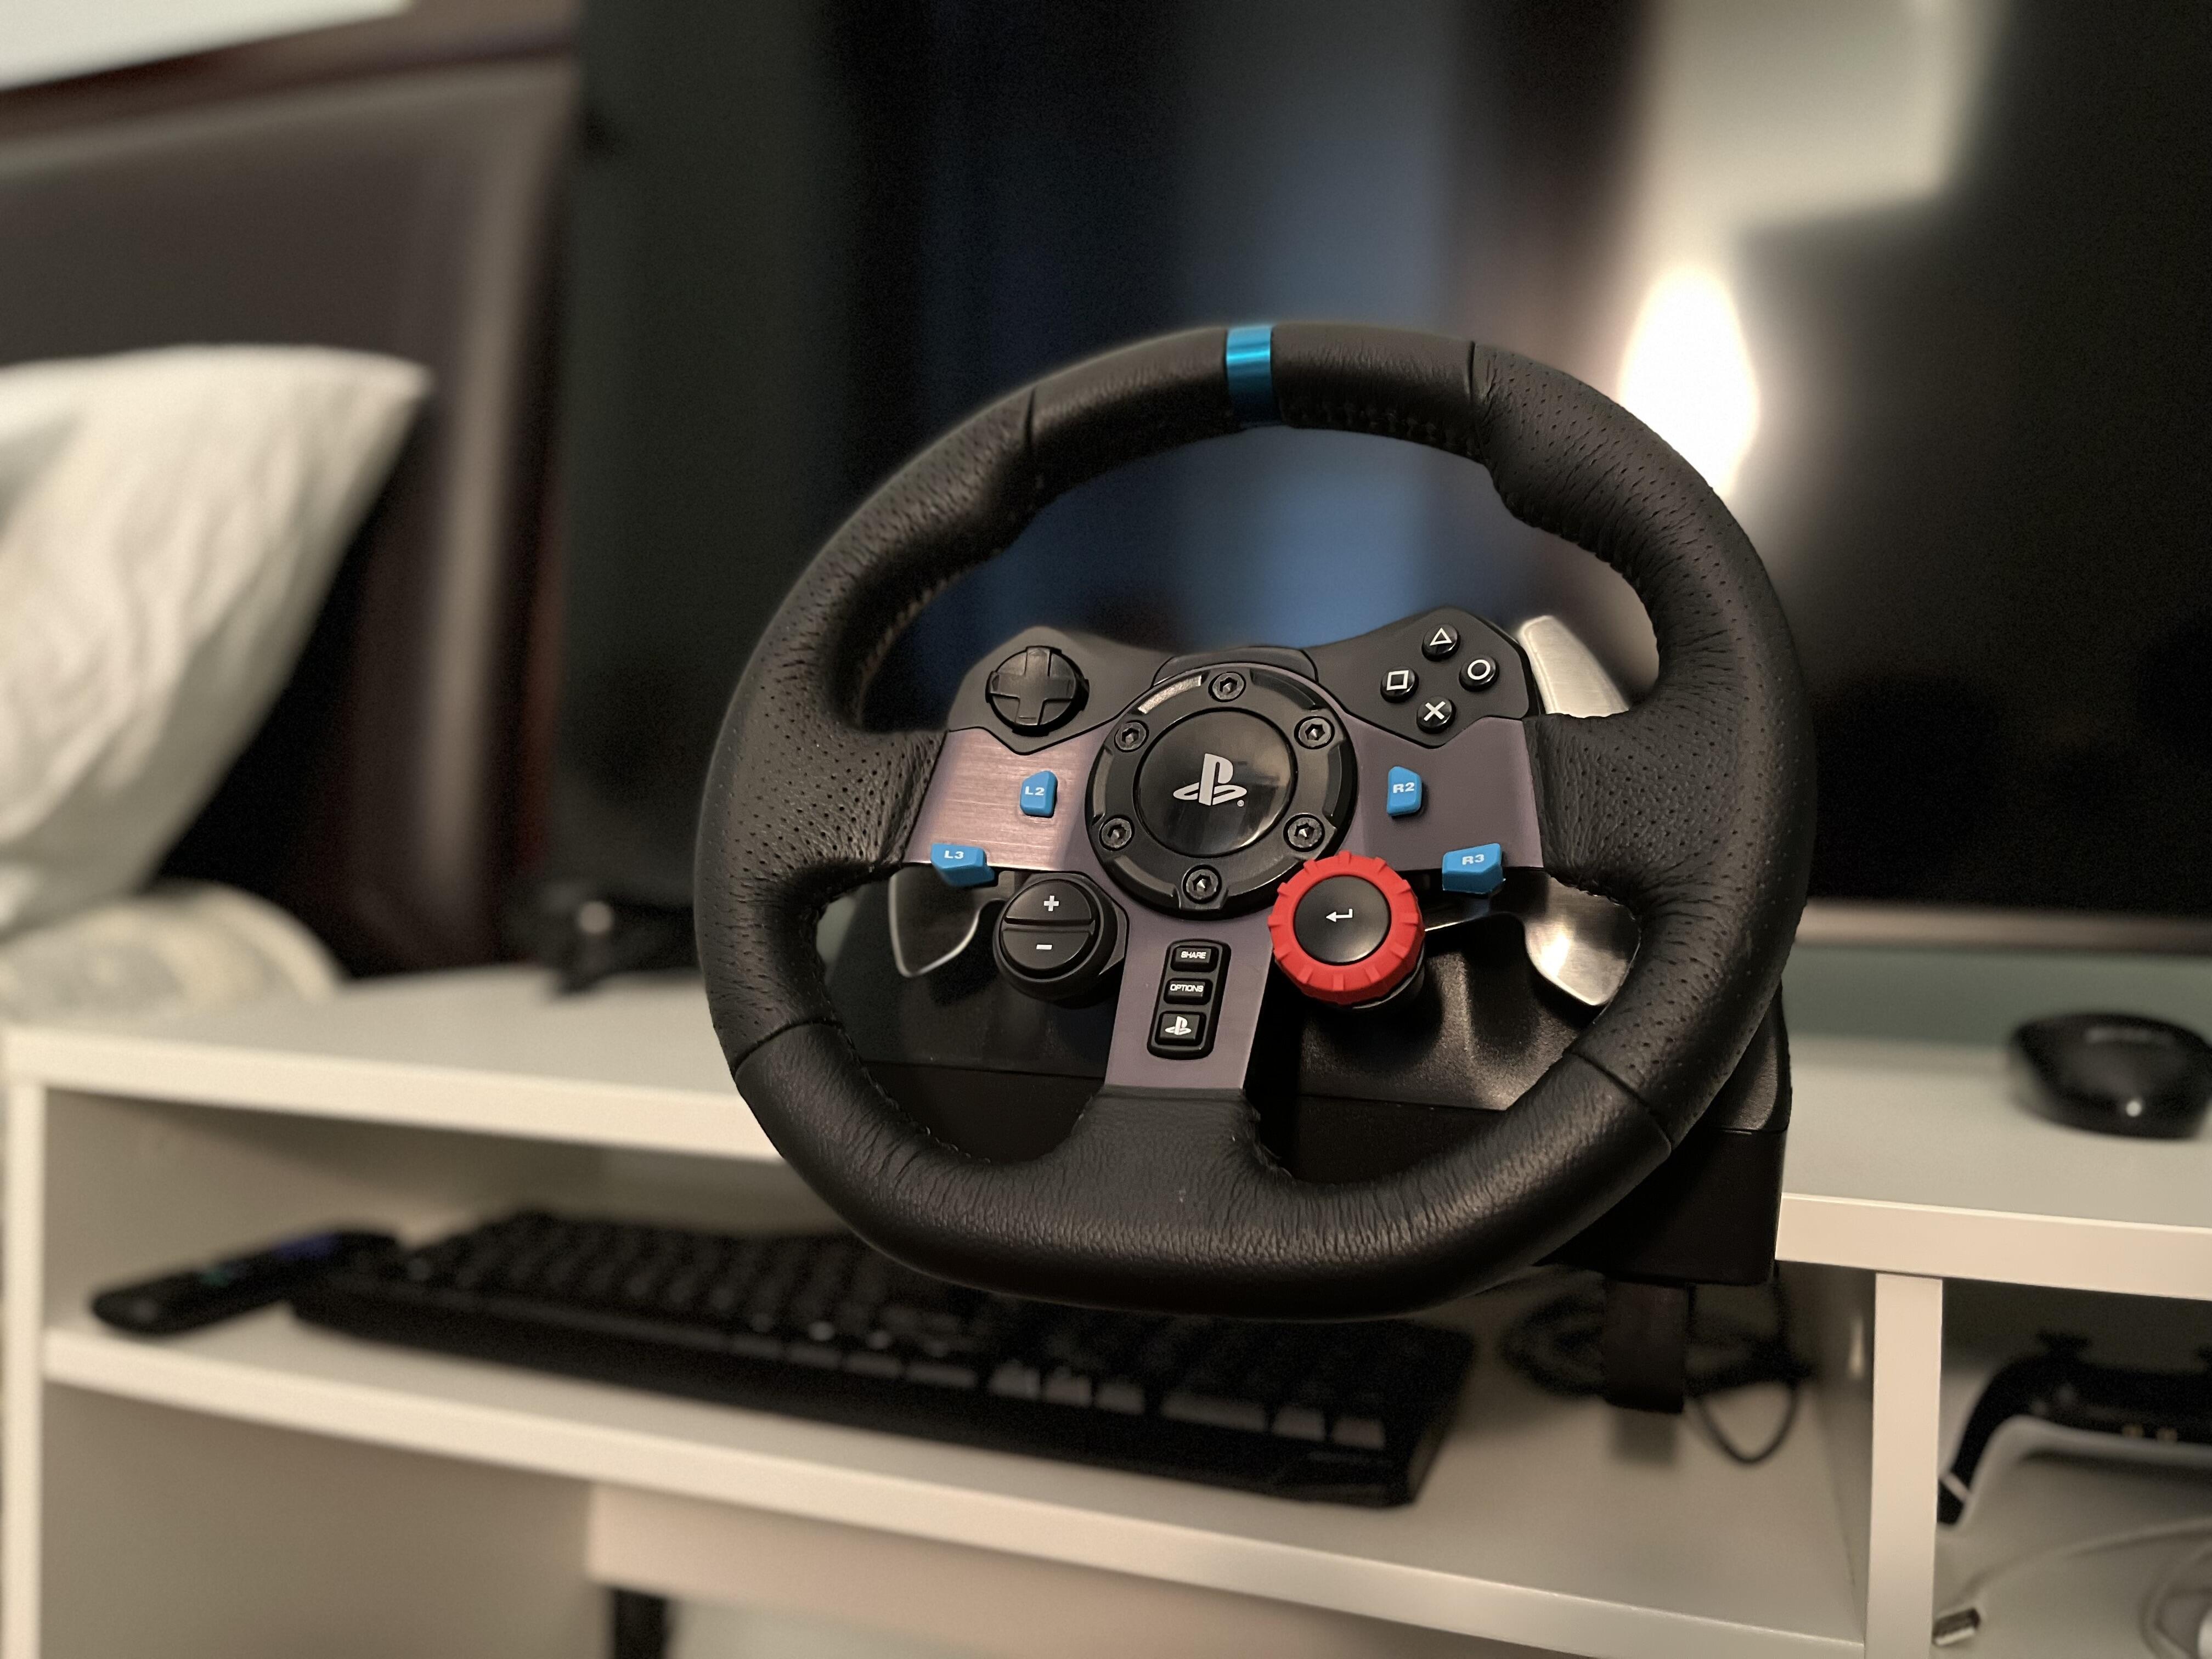 Unboxing & Test Drive of LOGITECH G923 RACING WHEEL & SHIFTER in